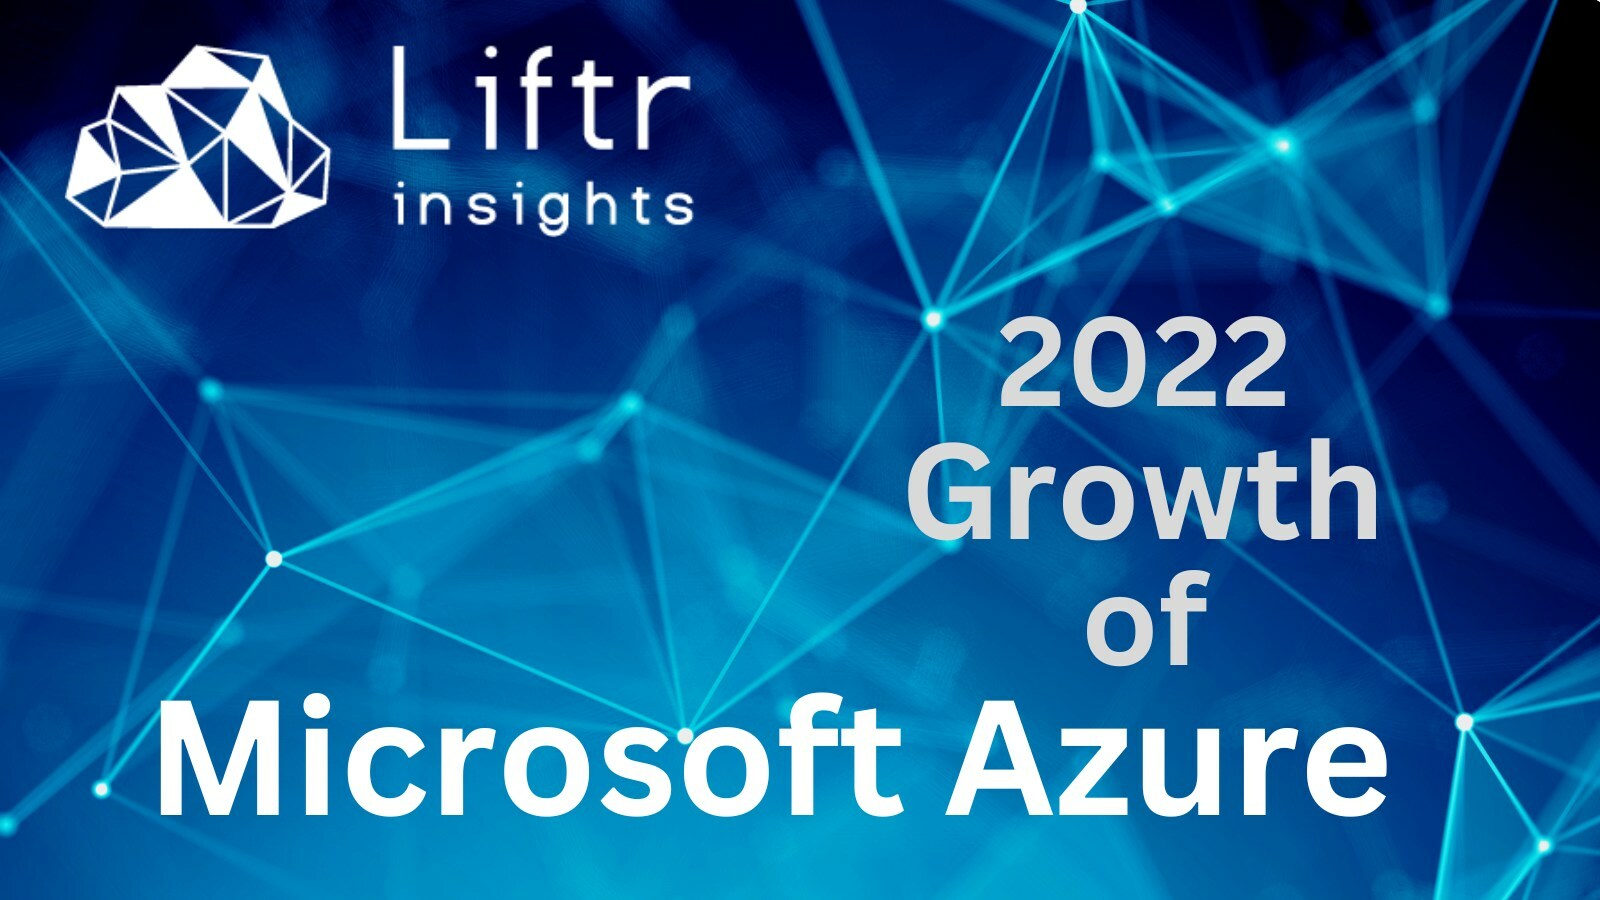 Liftr Insights shows notable growth of Azure in 2022